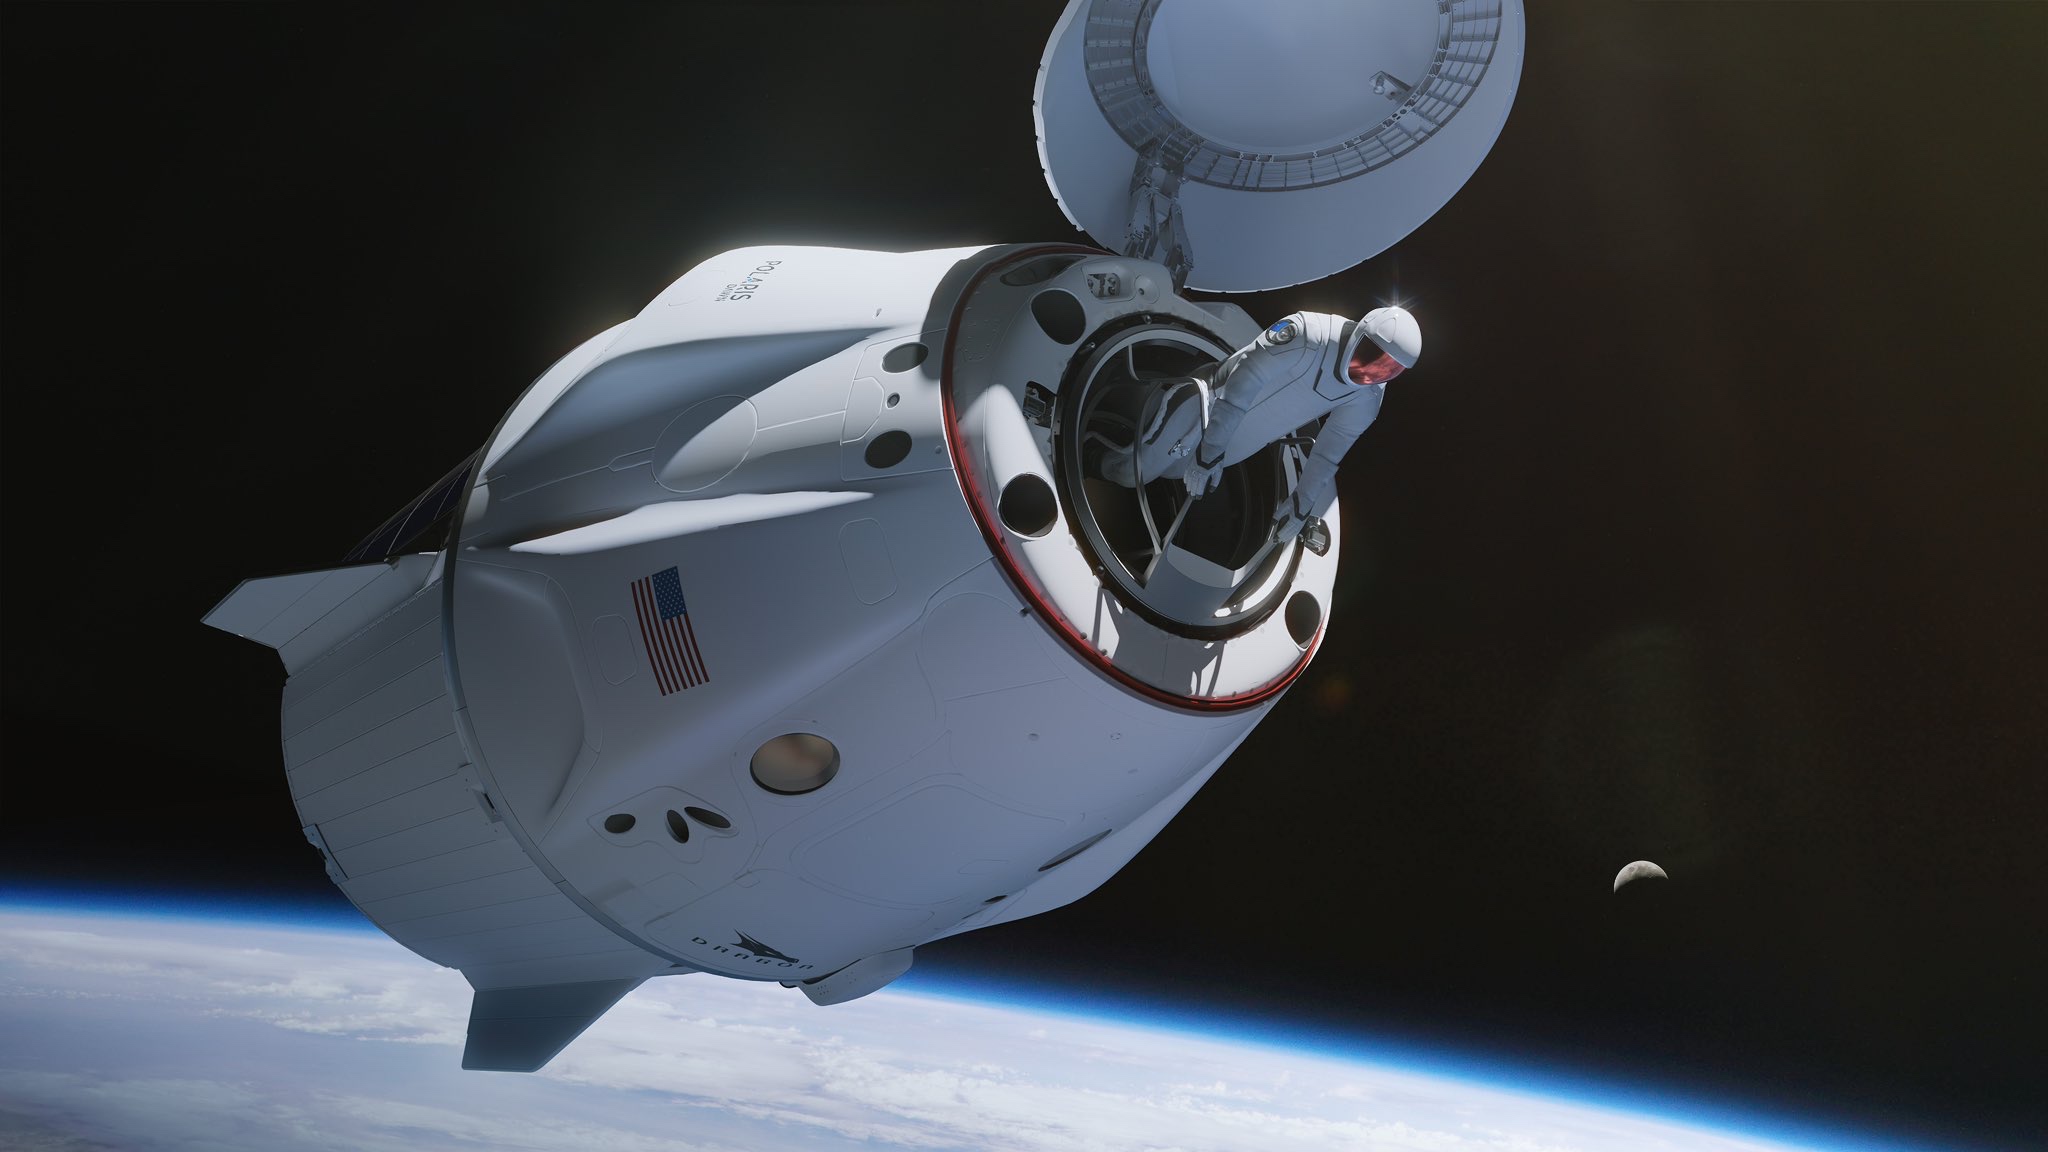 The Polaris Dawn private astronaut mission has been postponed to mid-2024